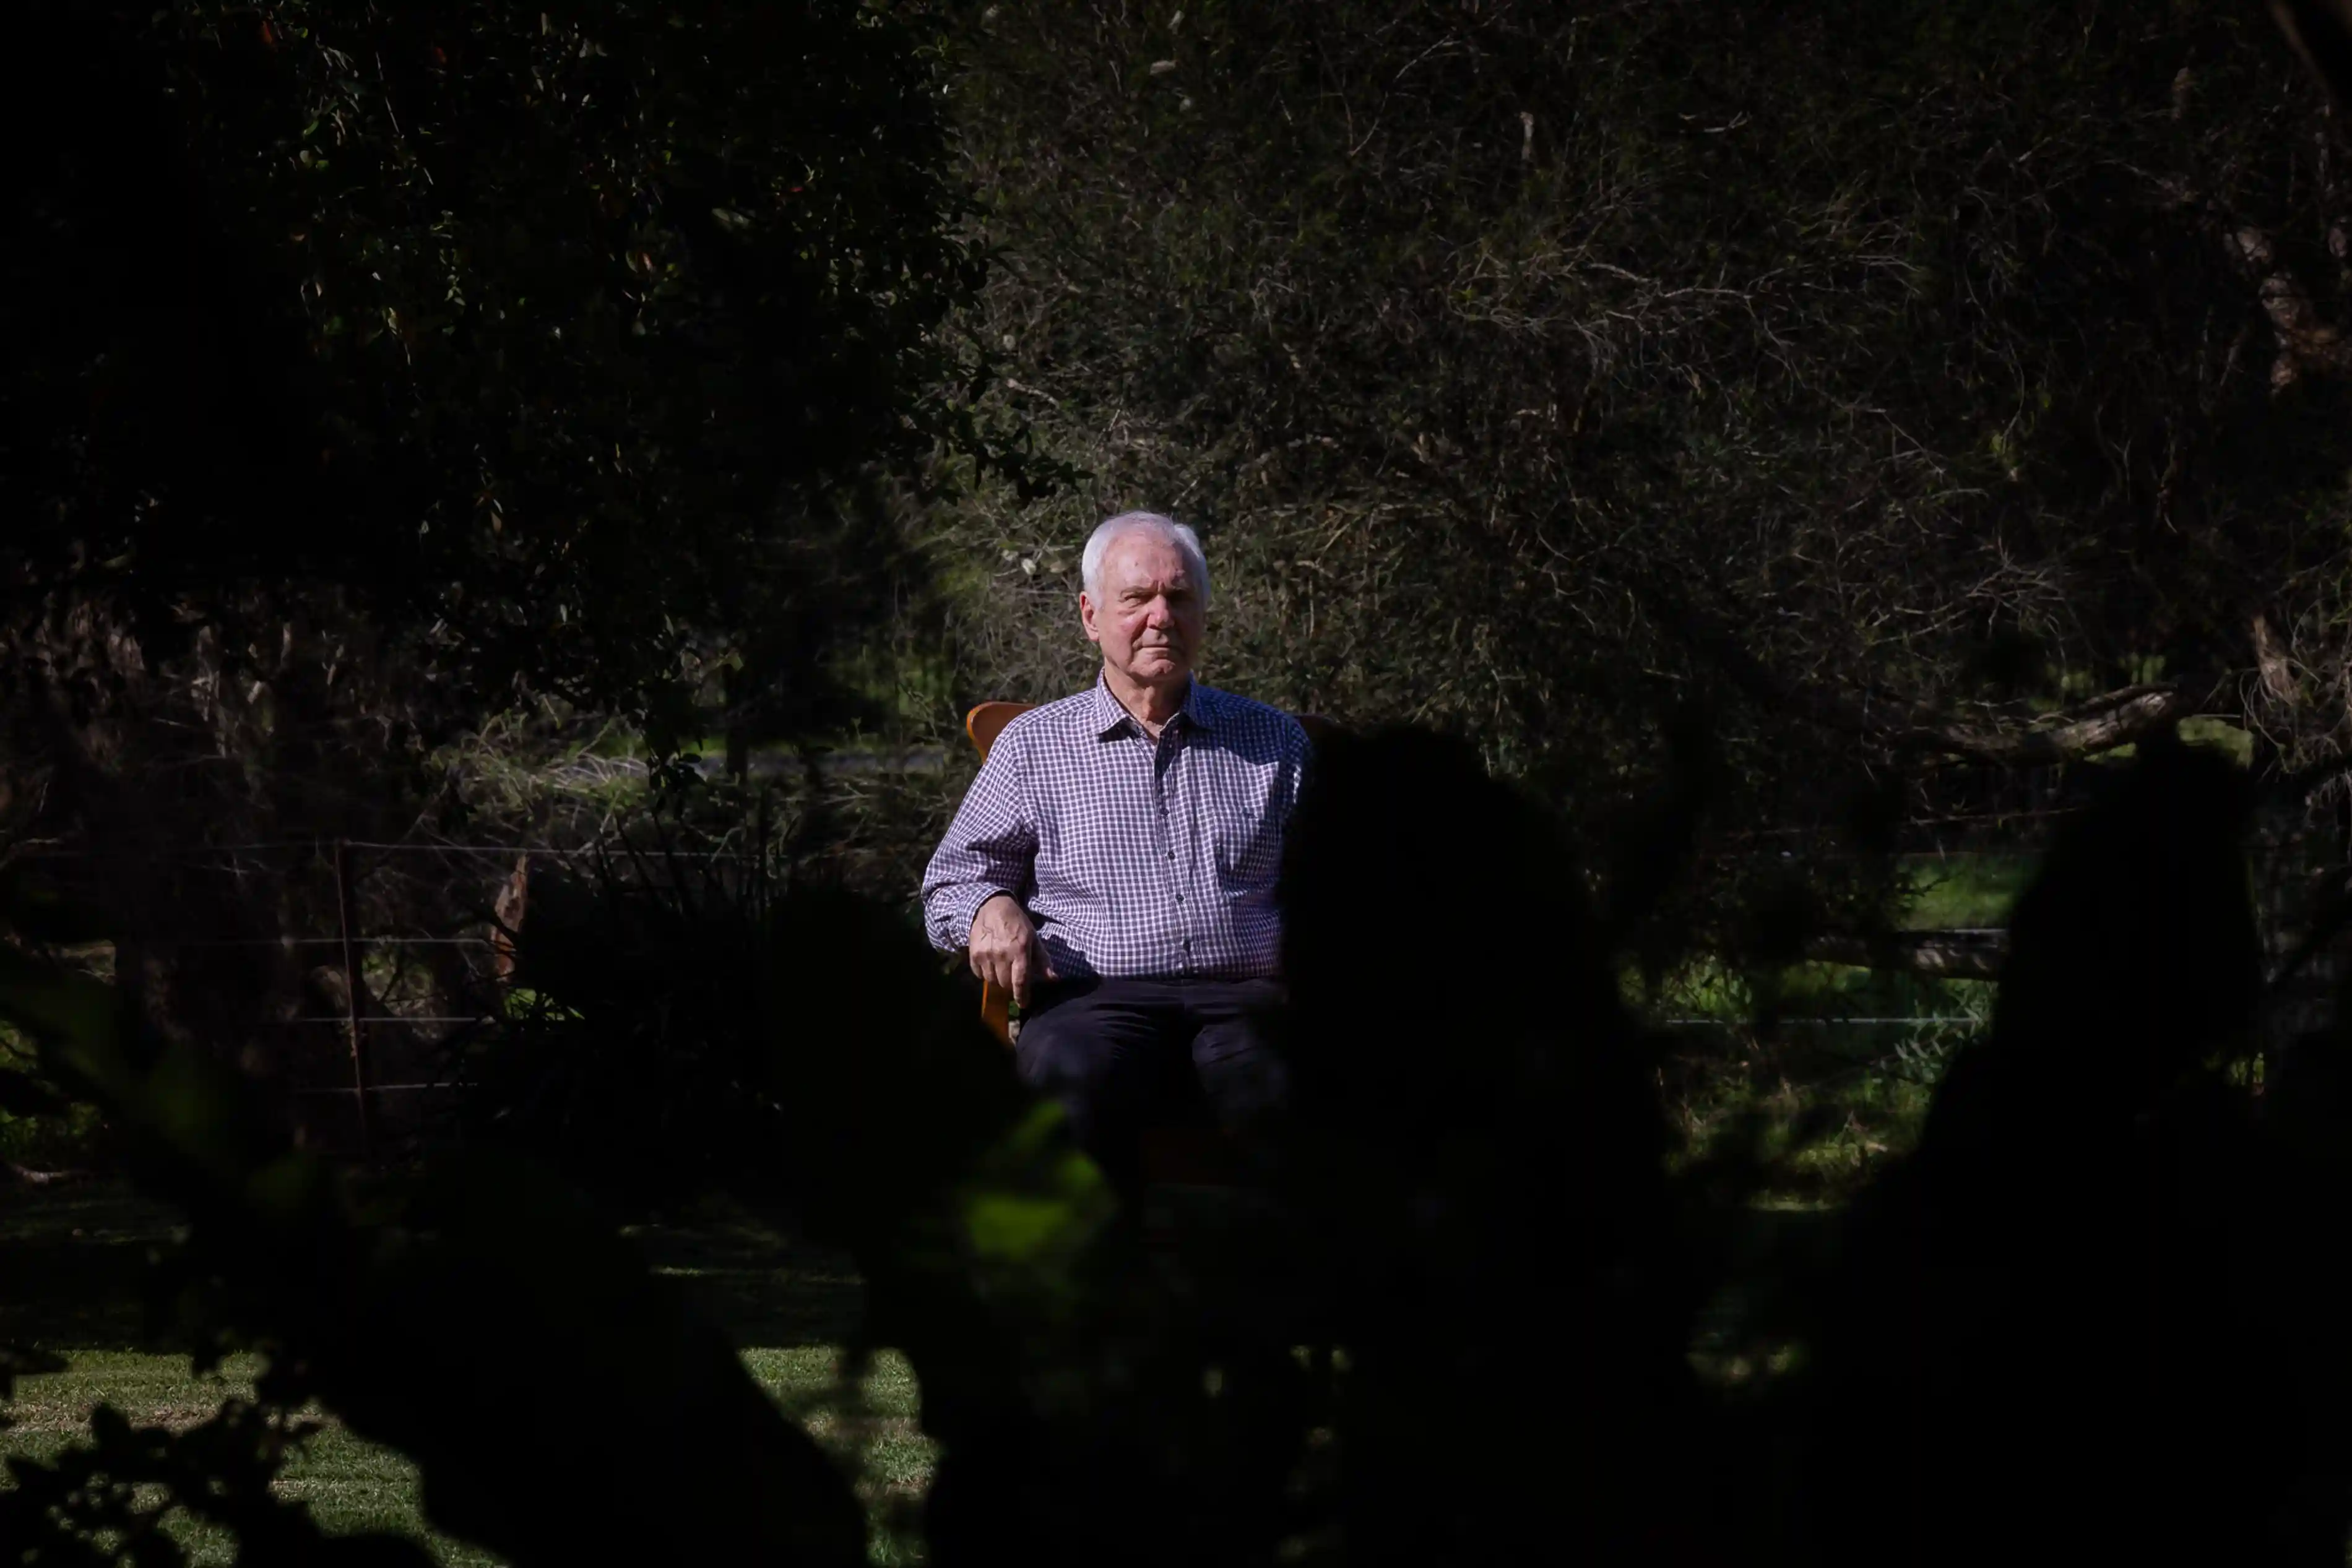 Climate scientist Dr. Graeme Pearman at his home in Bangholme, Victoria. On warning the world about abrupt climate change, he laments, “I often wonder: where did I go wrong? Why didn’t people respond? Is that my responsibility?” Photo: Nadir Kinani / The Guardian